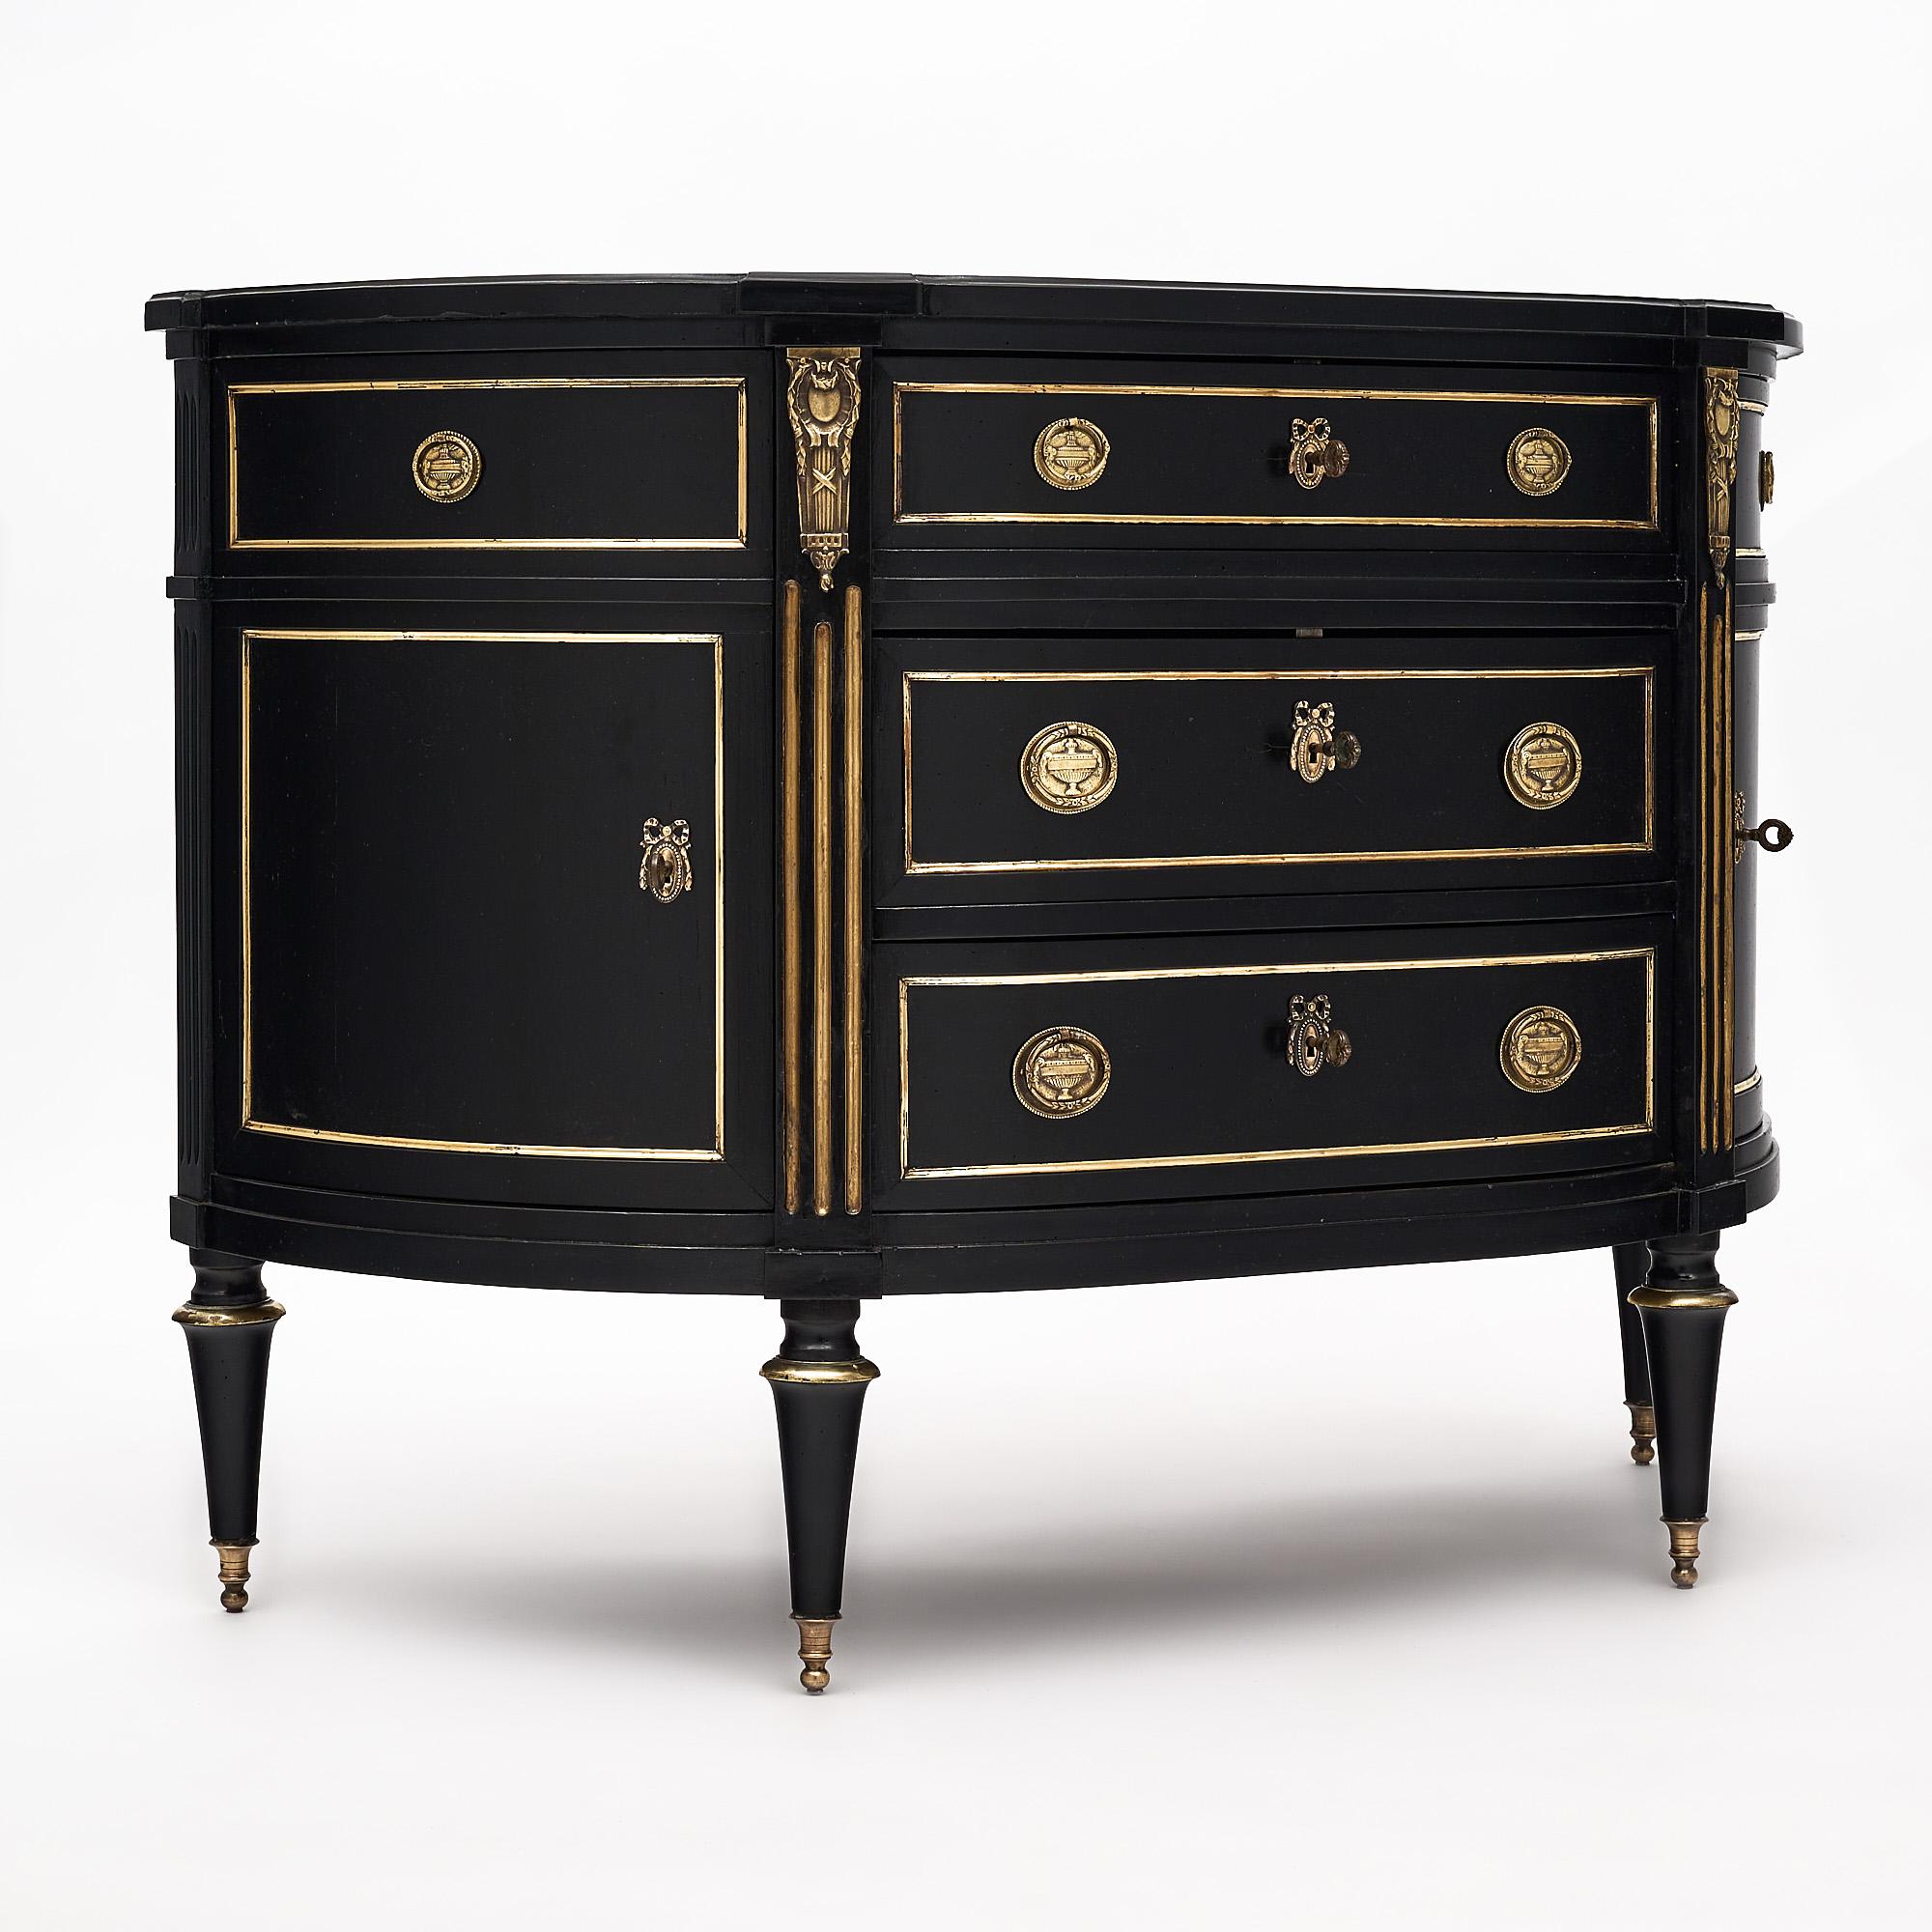 Demilune chest of drawers, French, in the Louis XVI style mad of solid ebonized cherrywood and finished with a lustrous Museum quality French polish. There are three dovetailed drawers, two doors, gilt brass trim throughout, and finely cast hardware.